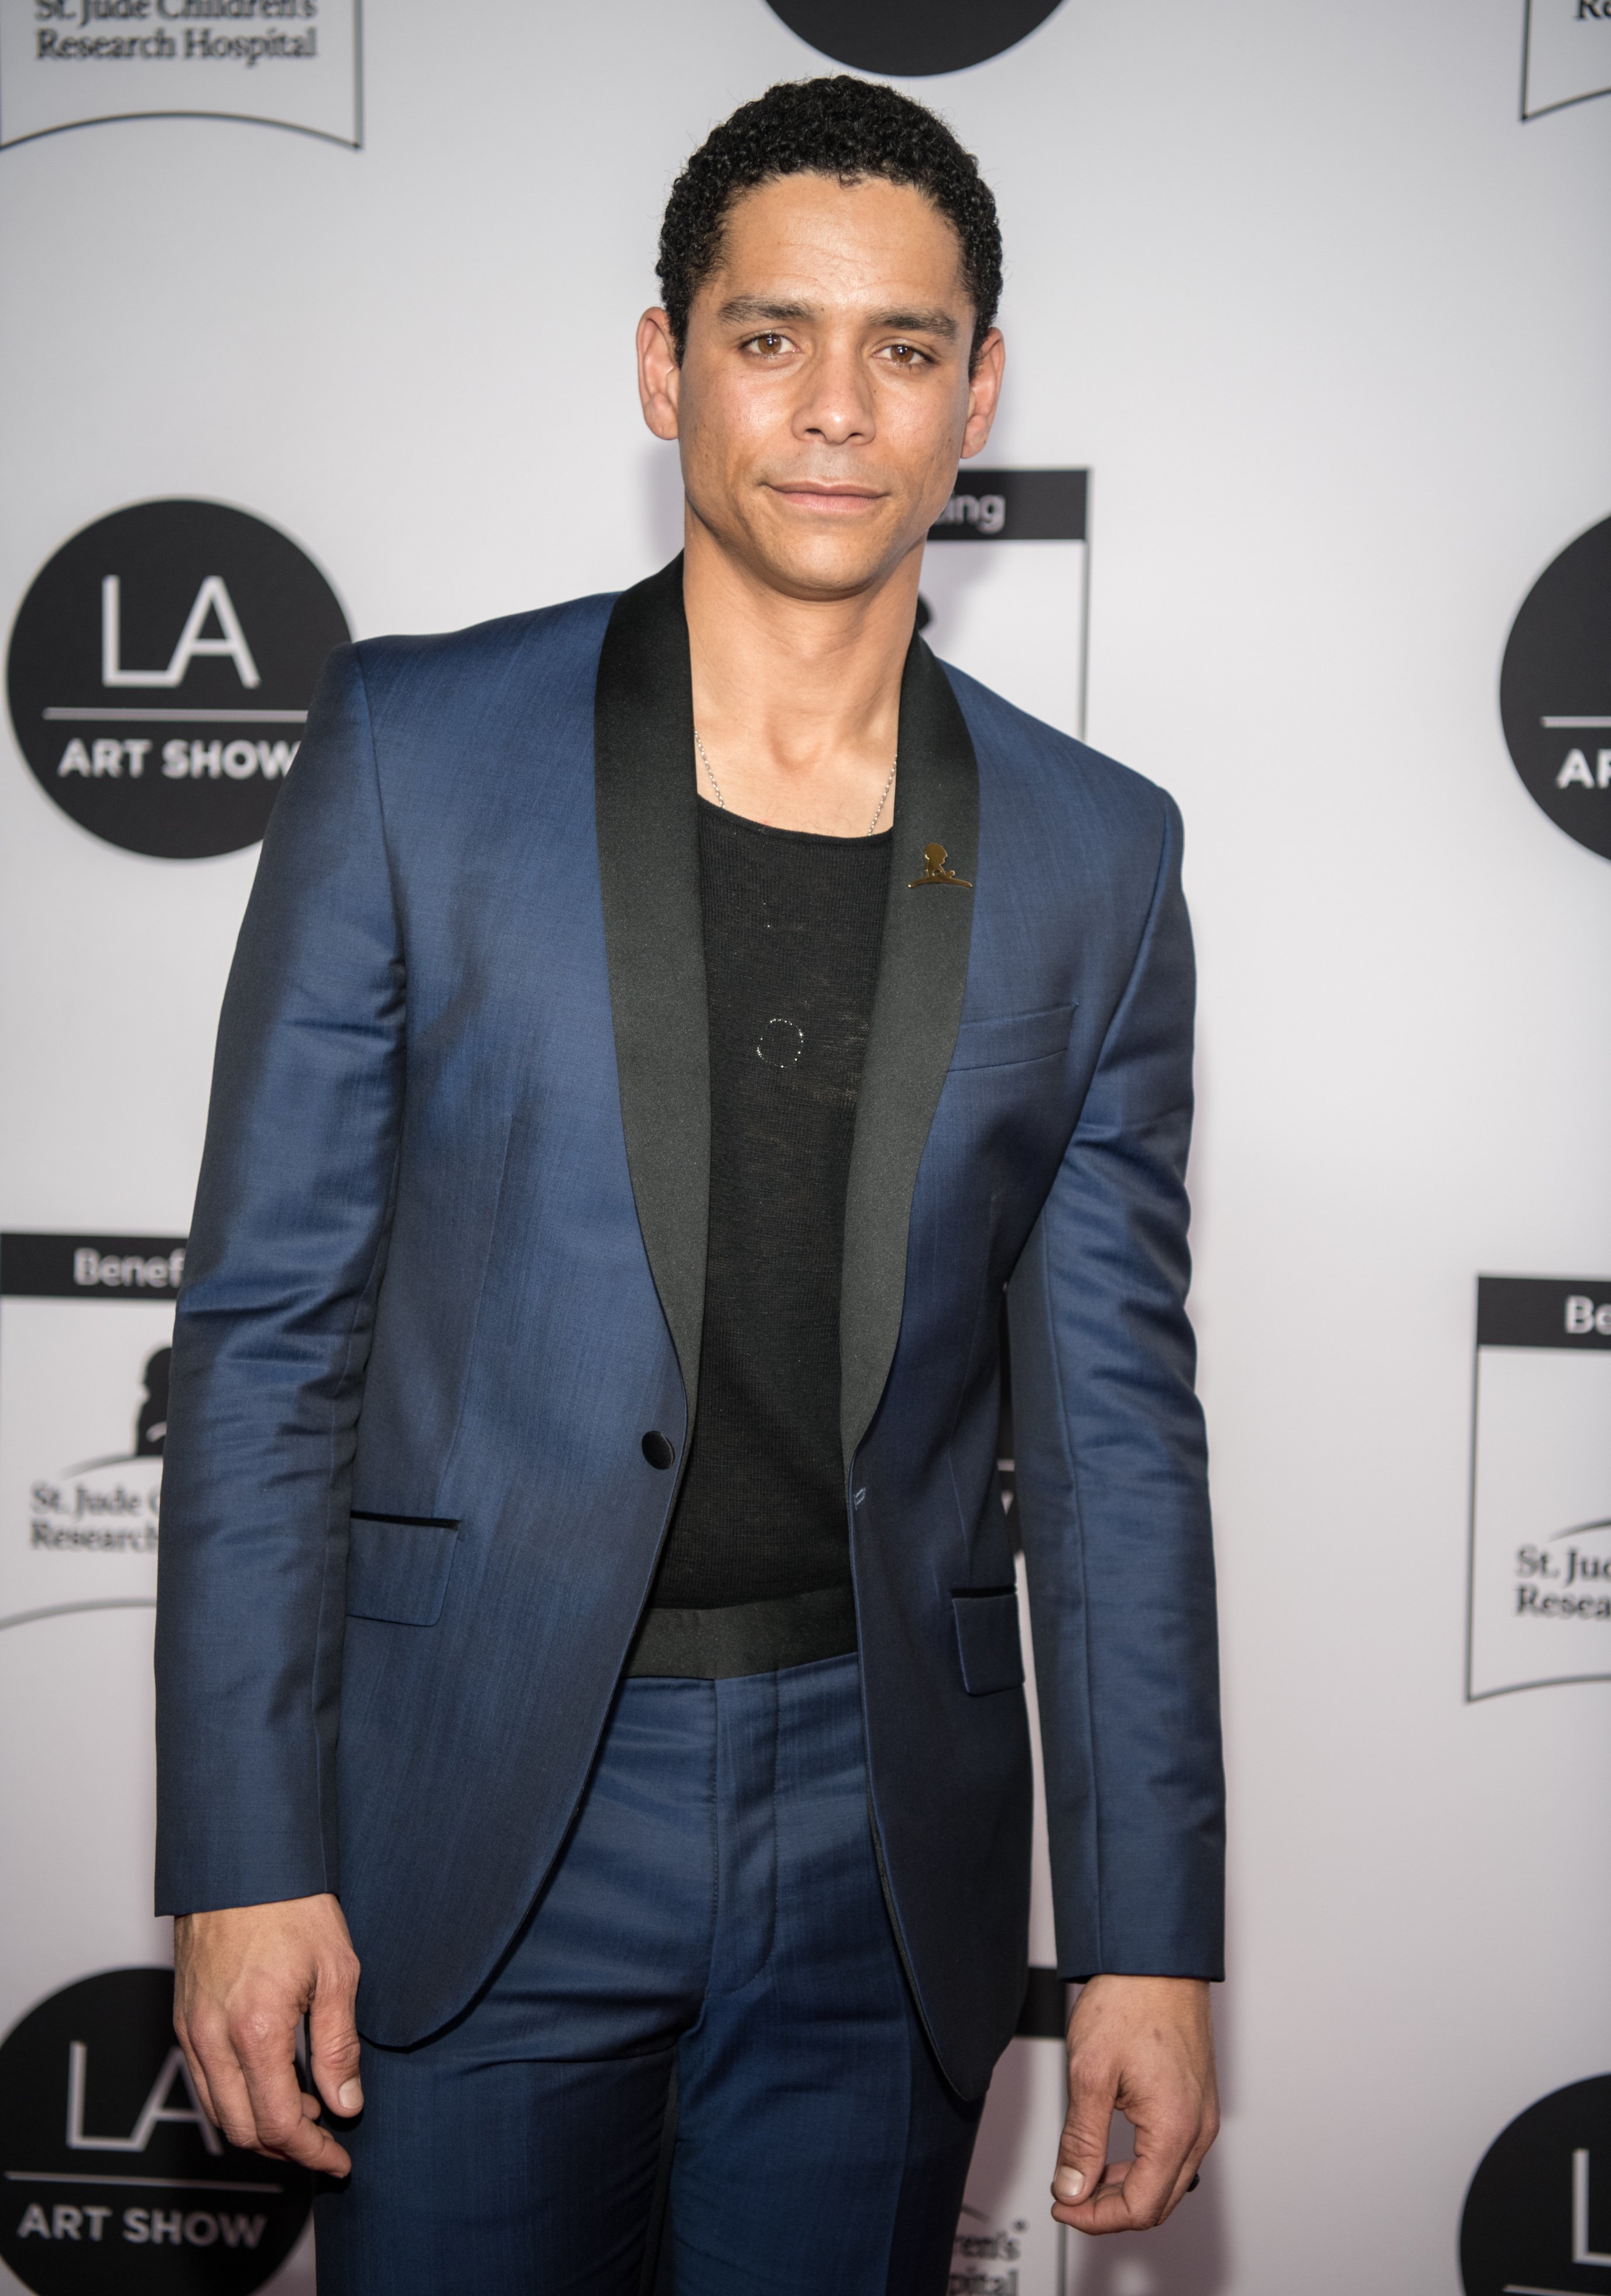 Charlie Barnett during the 2020 LA Art Show Opening Night at Los Angeles Convention Center on February 05, 2020, in Los Angeles, California. | Source: Getty Images